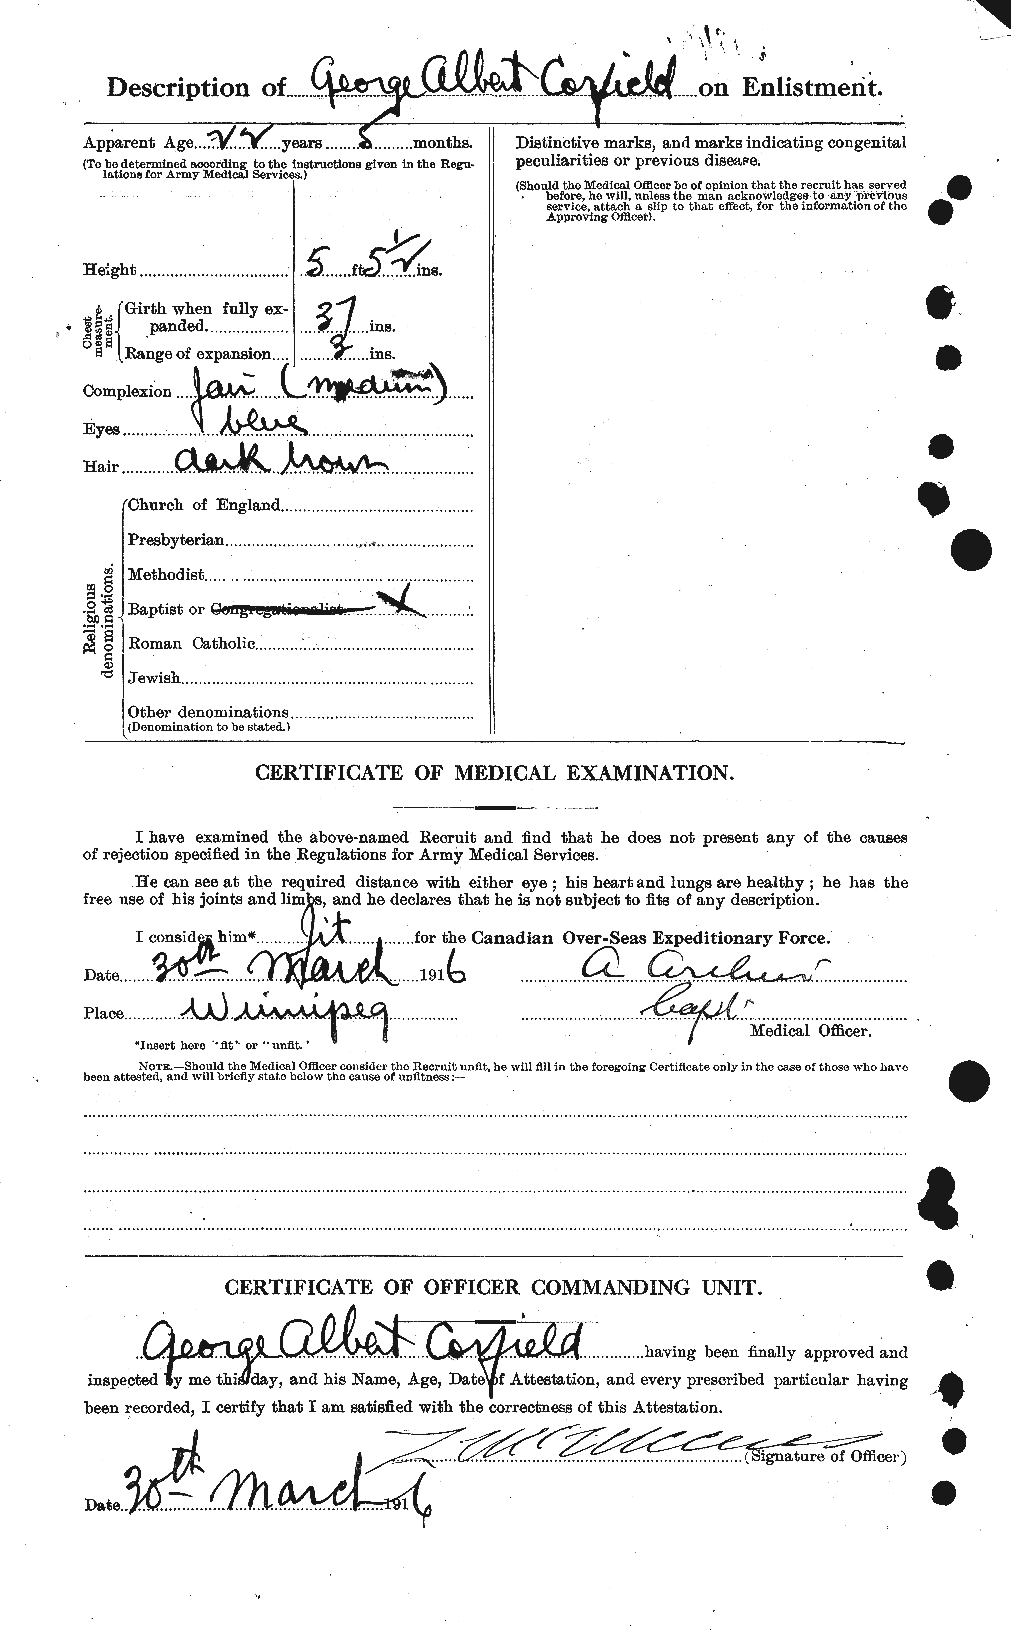 Personnel Records of the First World War - CEF 054386b